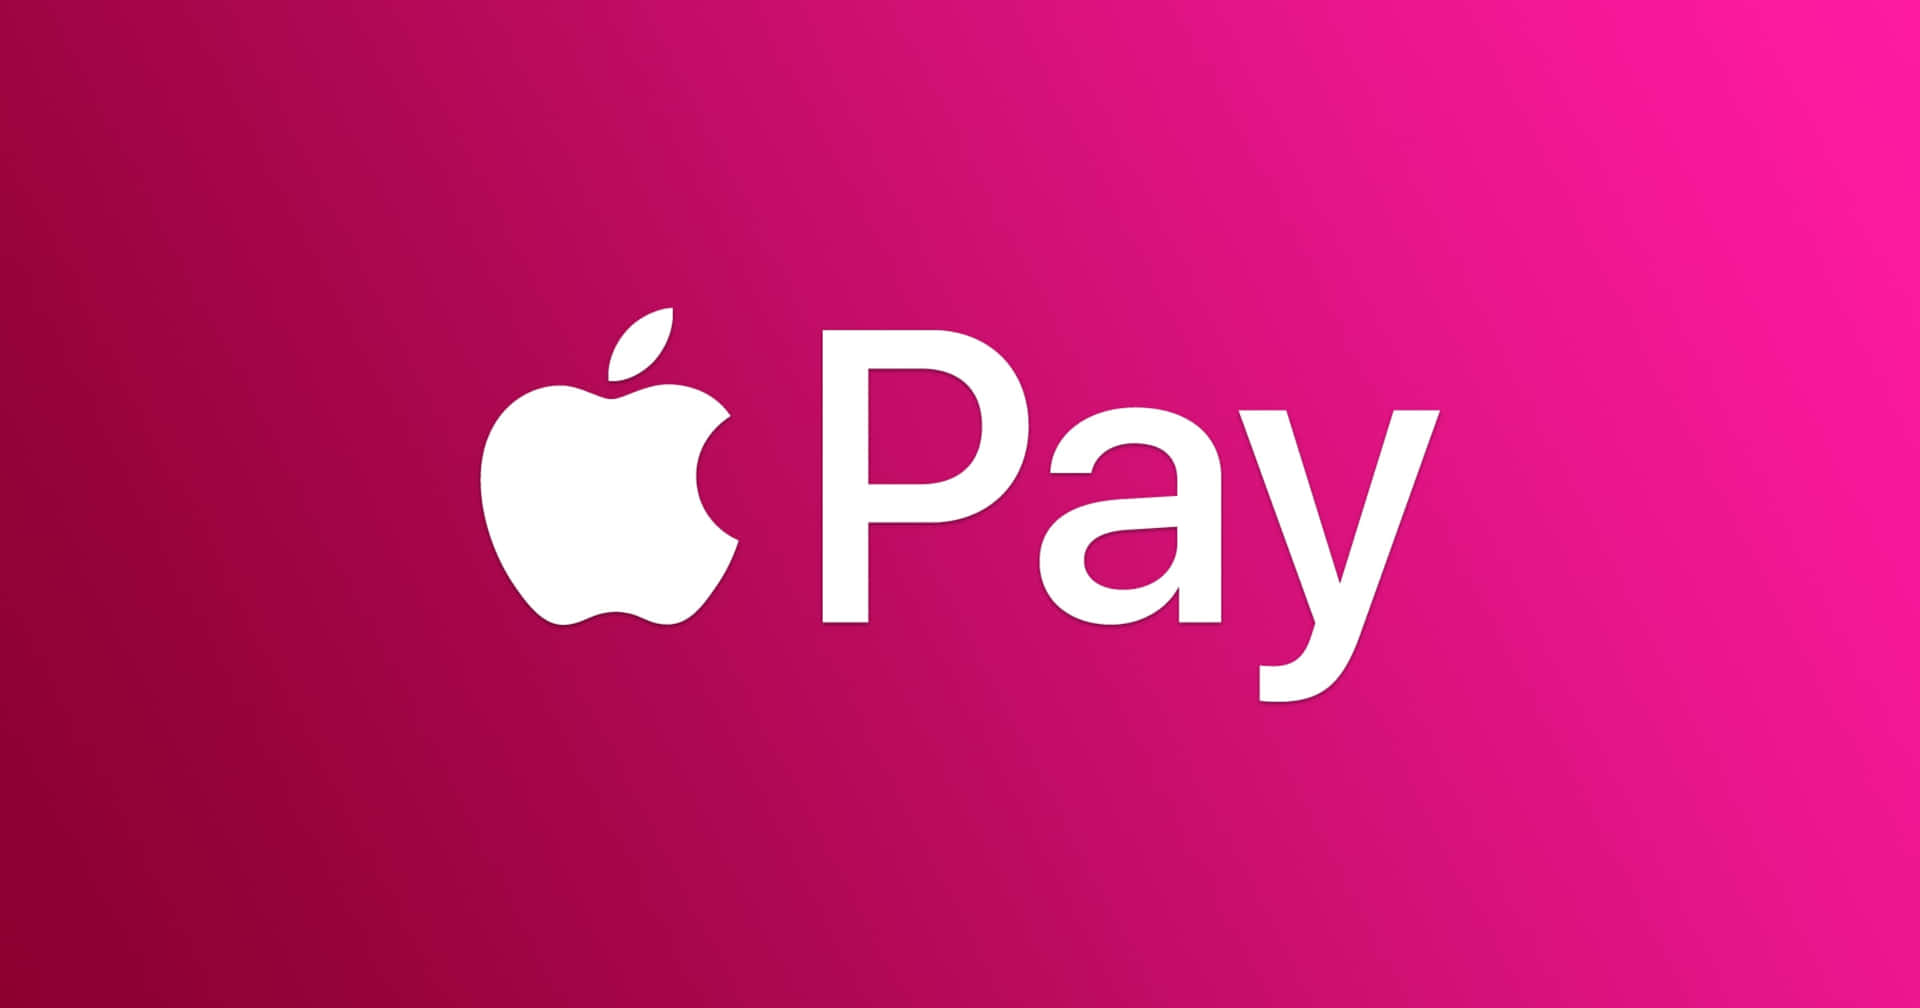 Moving Money Onward Together with Apple Pay